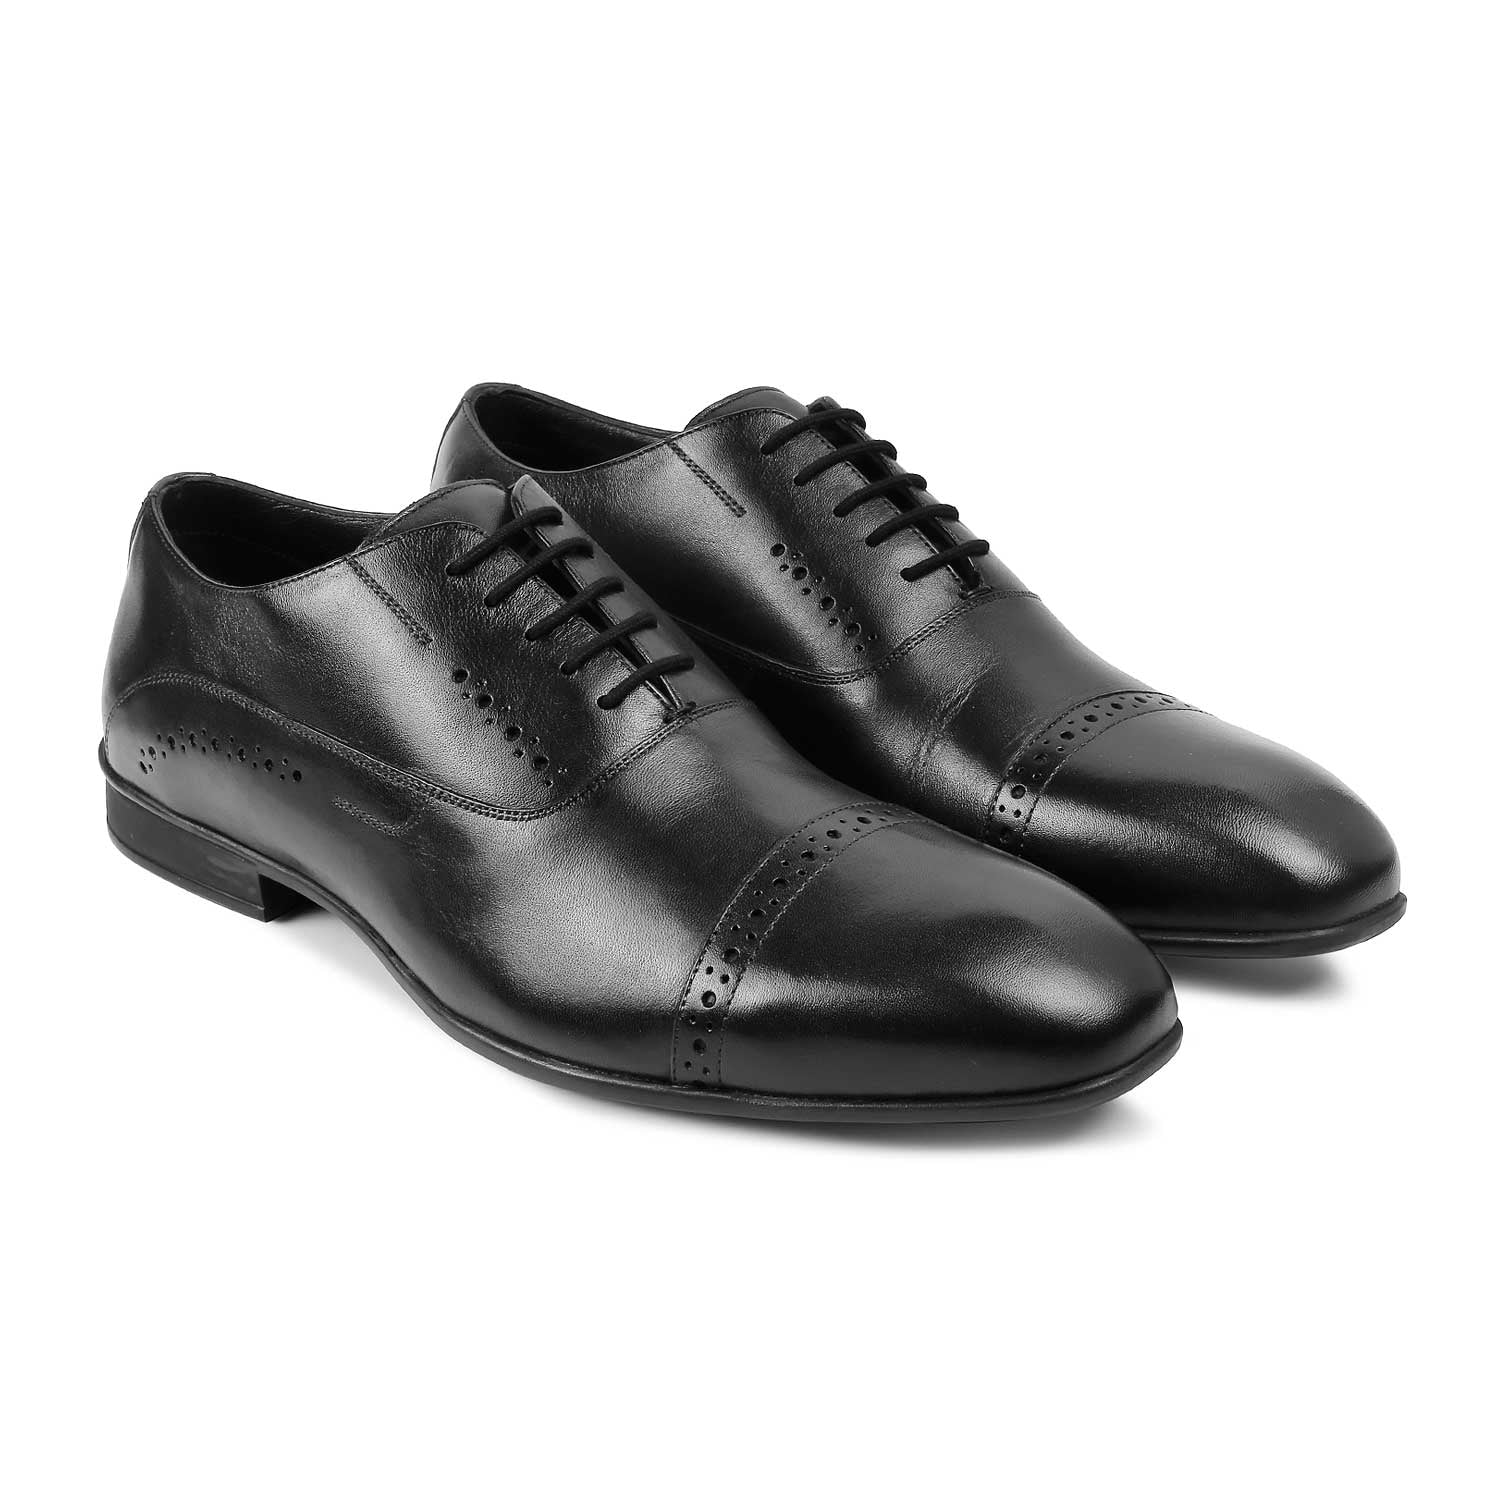 The Togford Black Men's Oxford Lace Ups Tresmode